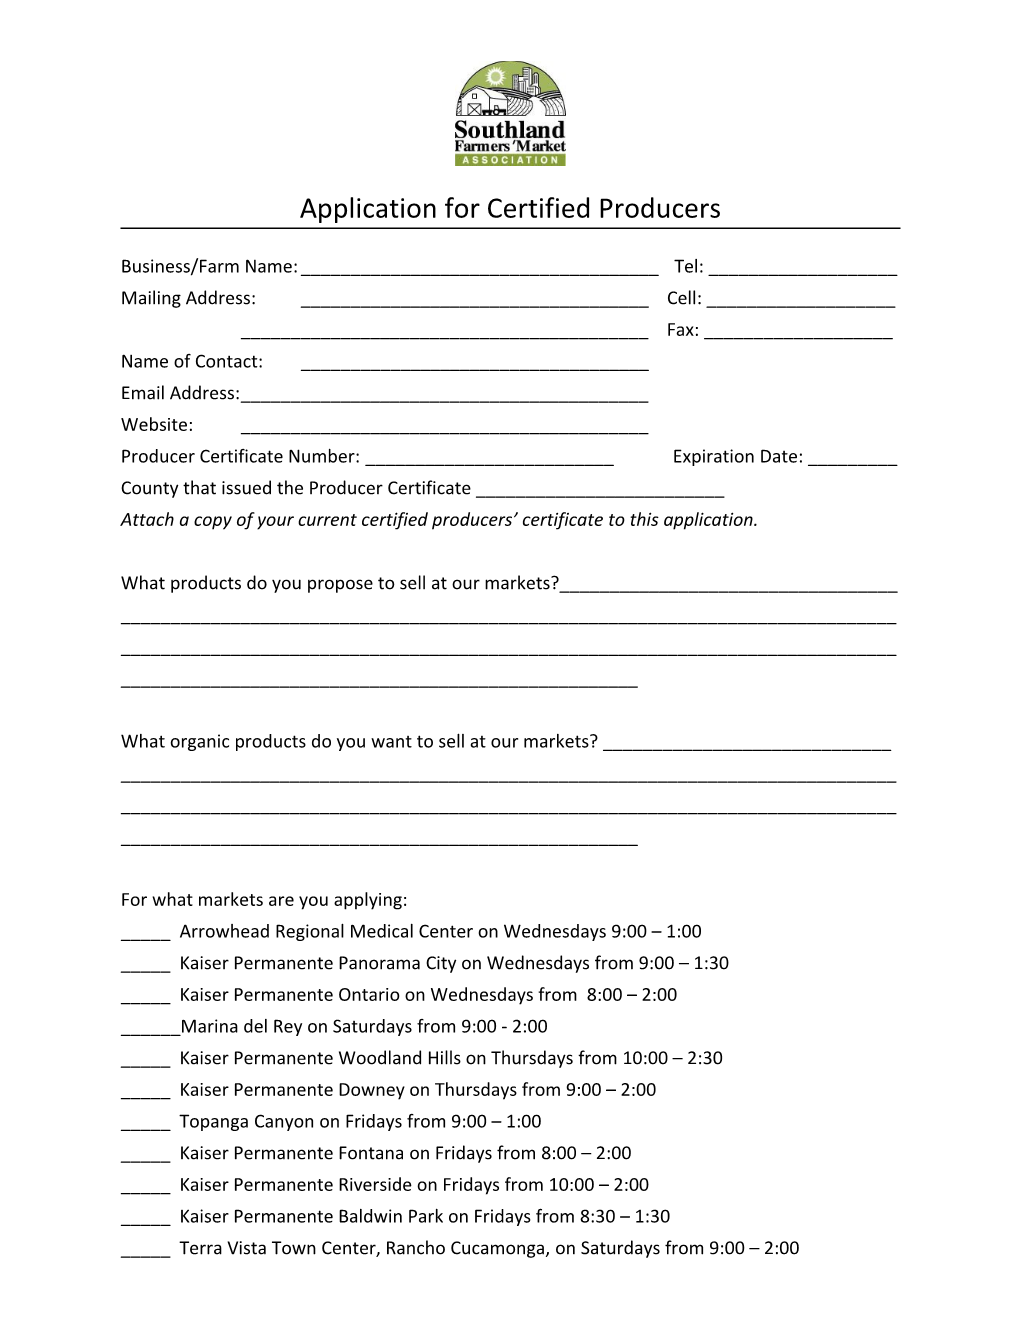 Application for Certified Producers